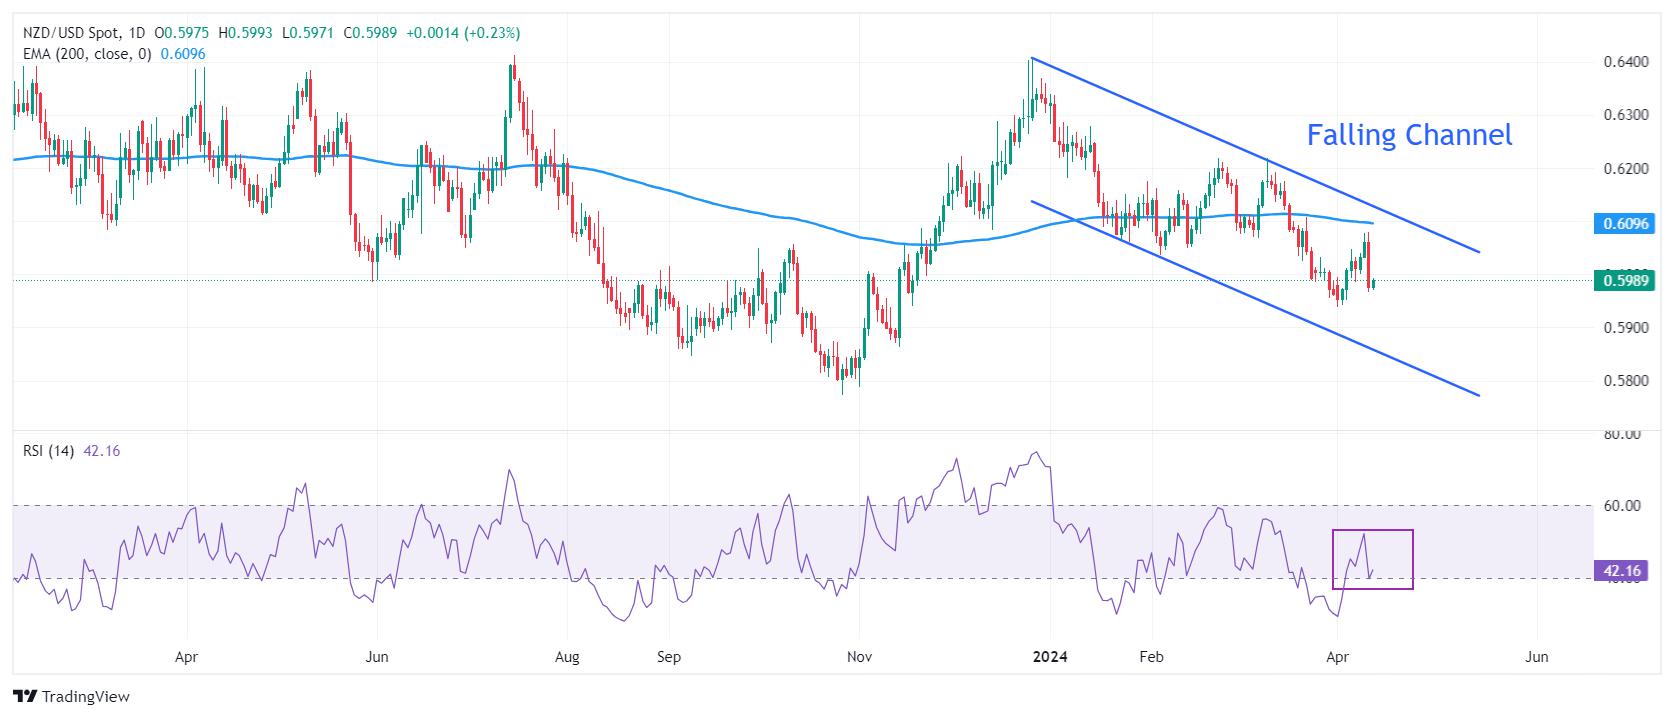 NZD/USD Price Analysis: Remains below 0.6000 as US Dollar sees more upside